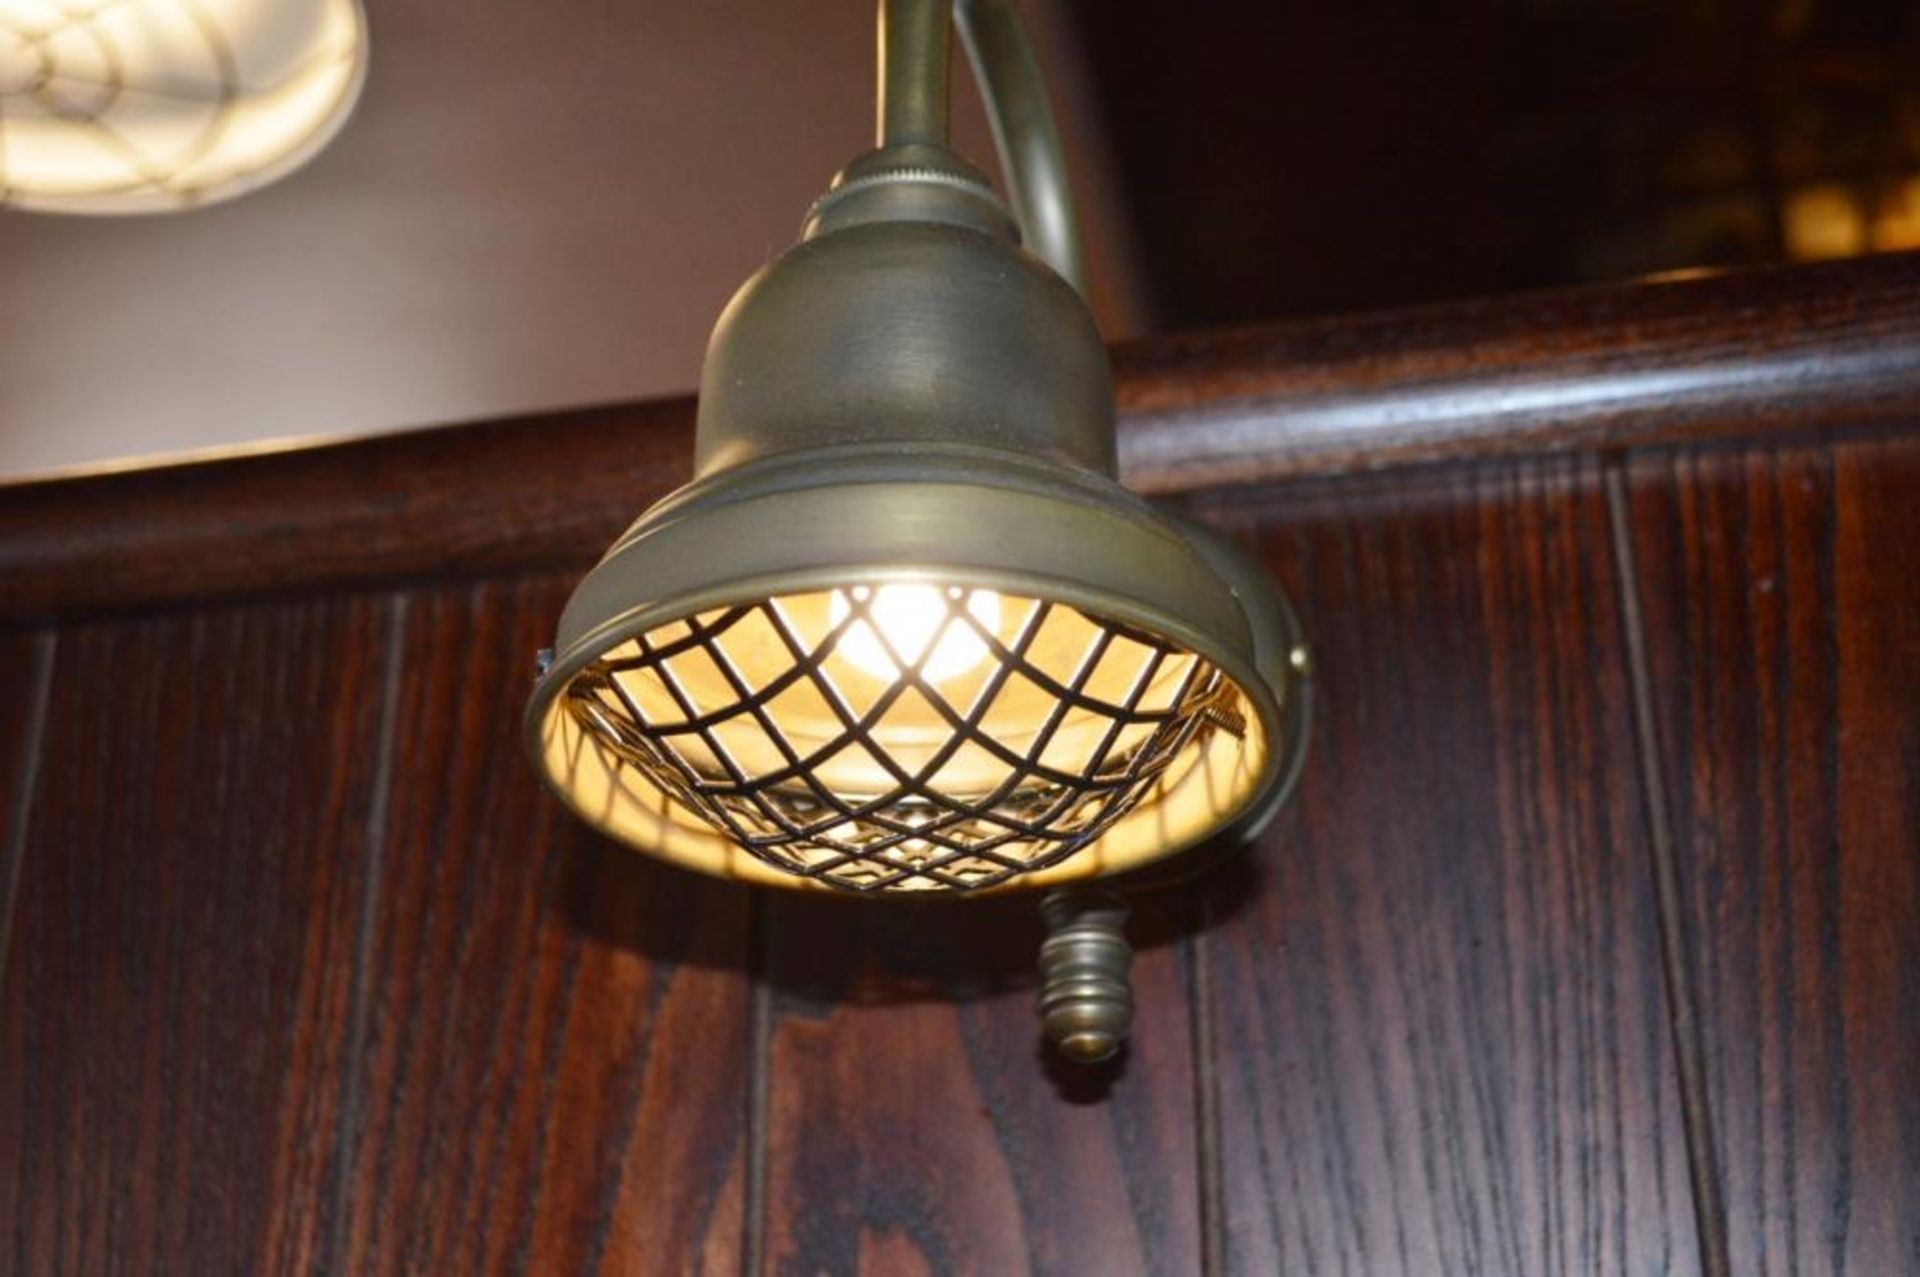 5 x Fisherman Style Wall Mounted Restaurant Table Lights With Brass Finish - H20 x W12 x D23 cms - - Image 3 of 3